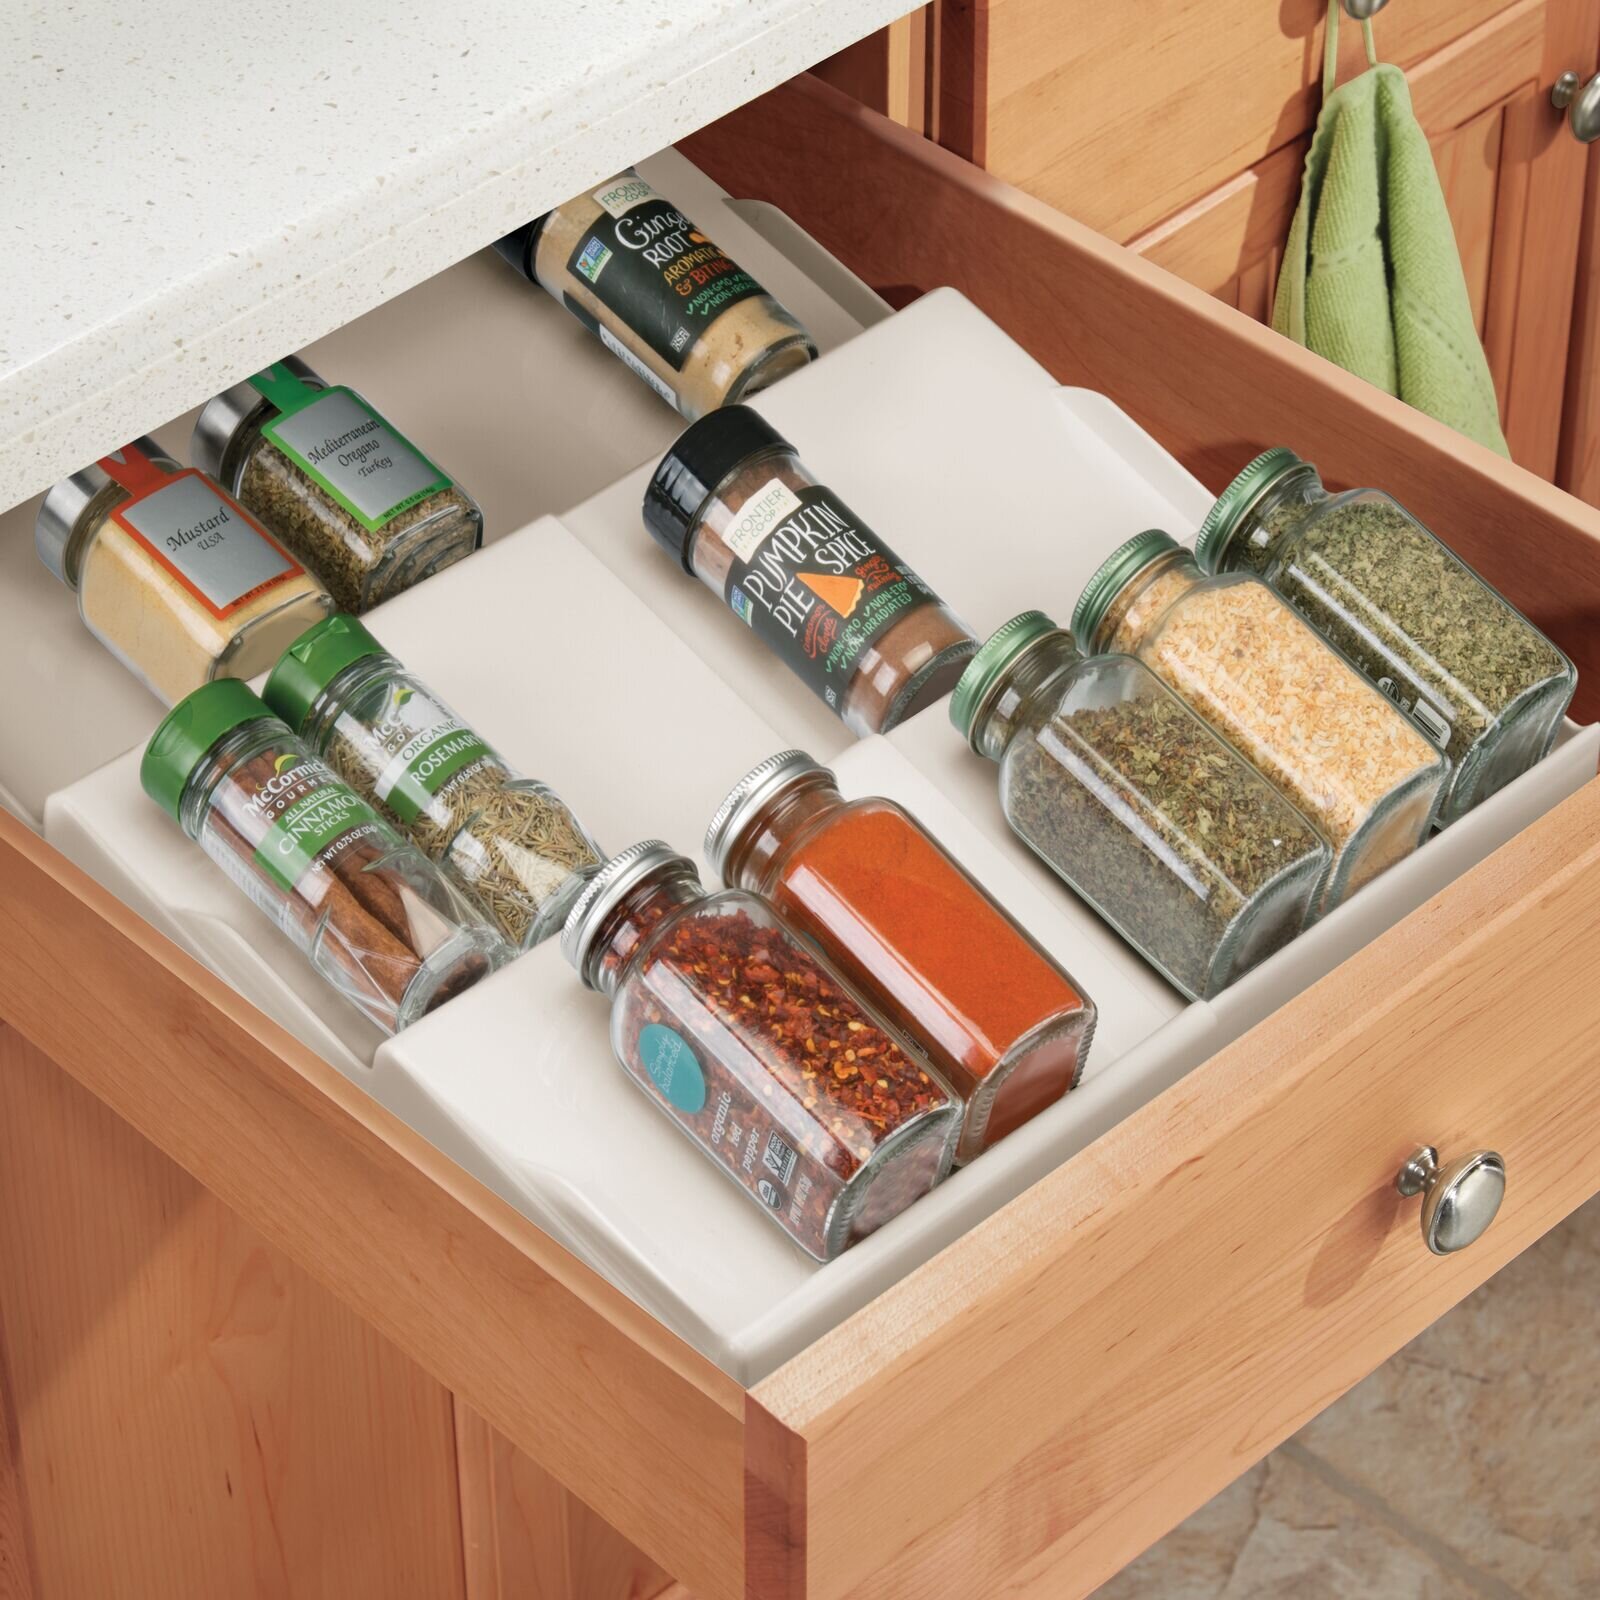 mDesign Expandable Plastic Spice Rack Kitchen Drawer Organizer - 3 Tiers - Cream